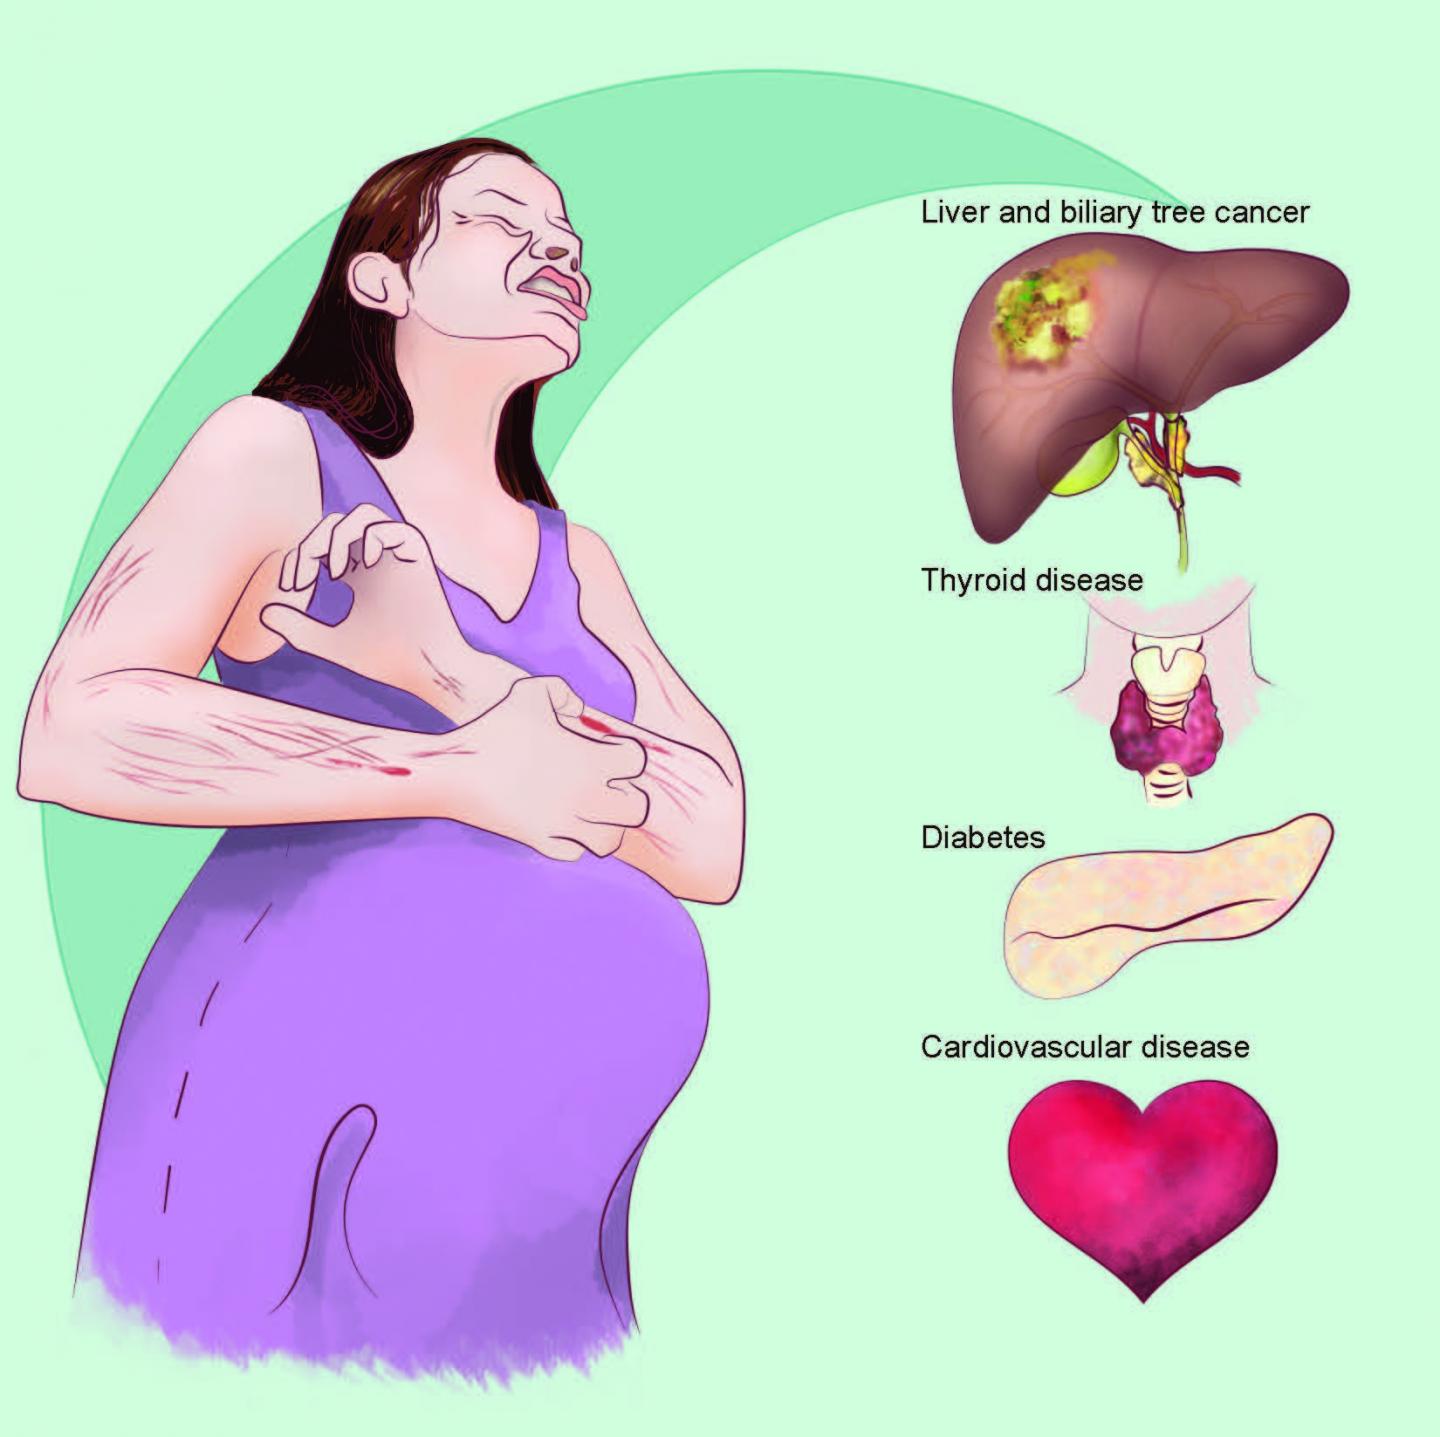 Research Links Intrahepatic Cholestasis of Pregnancy with  Liver Cancer and Other Diseases Later in Life